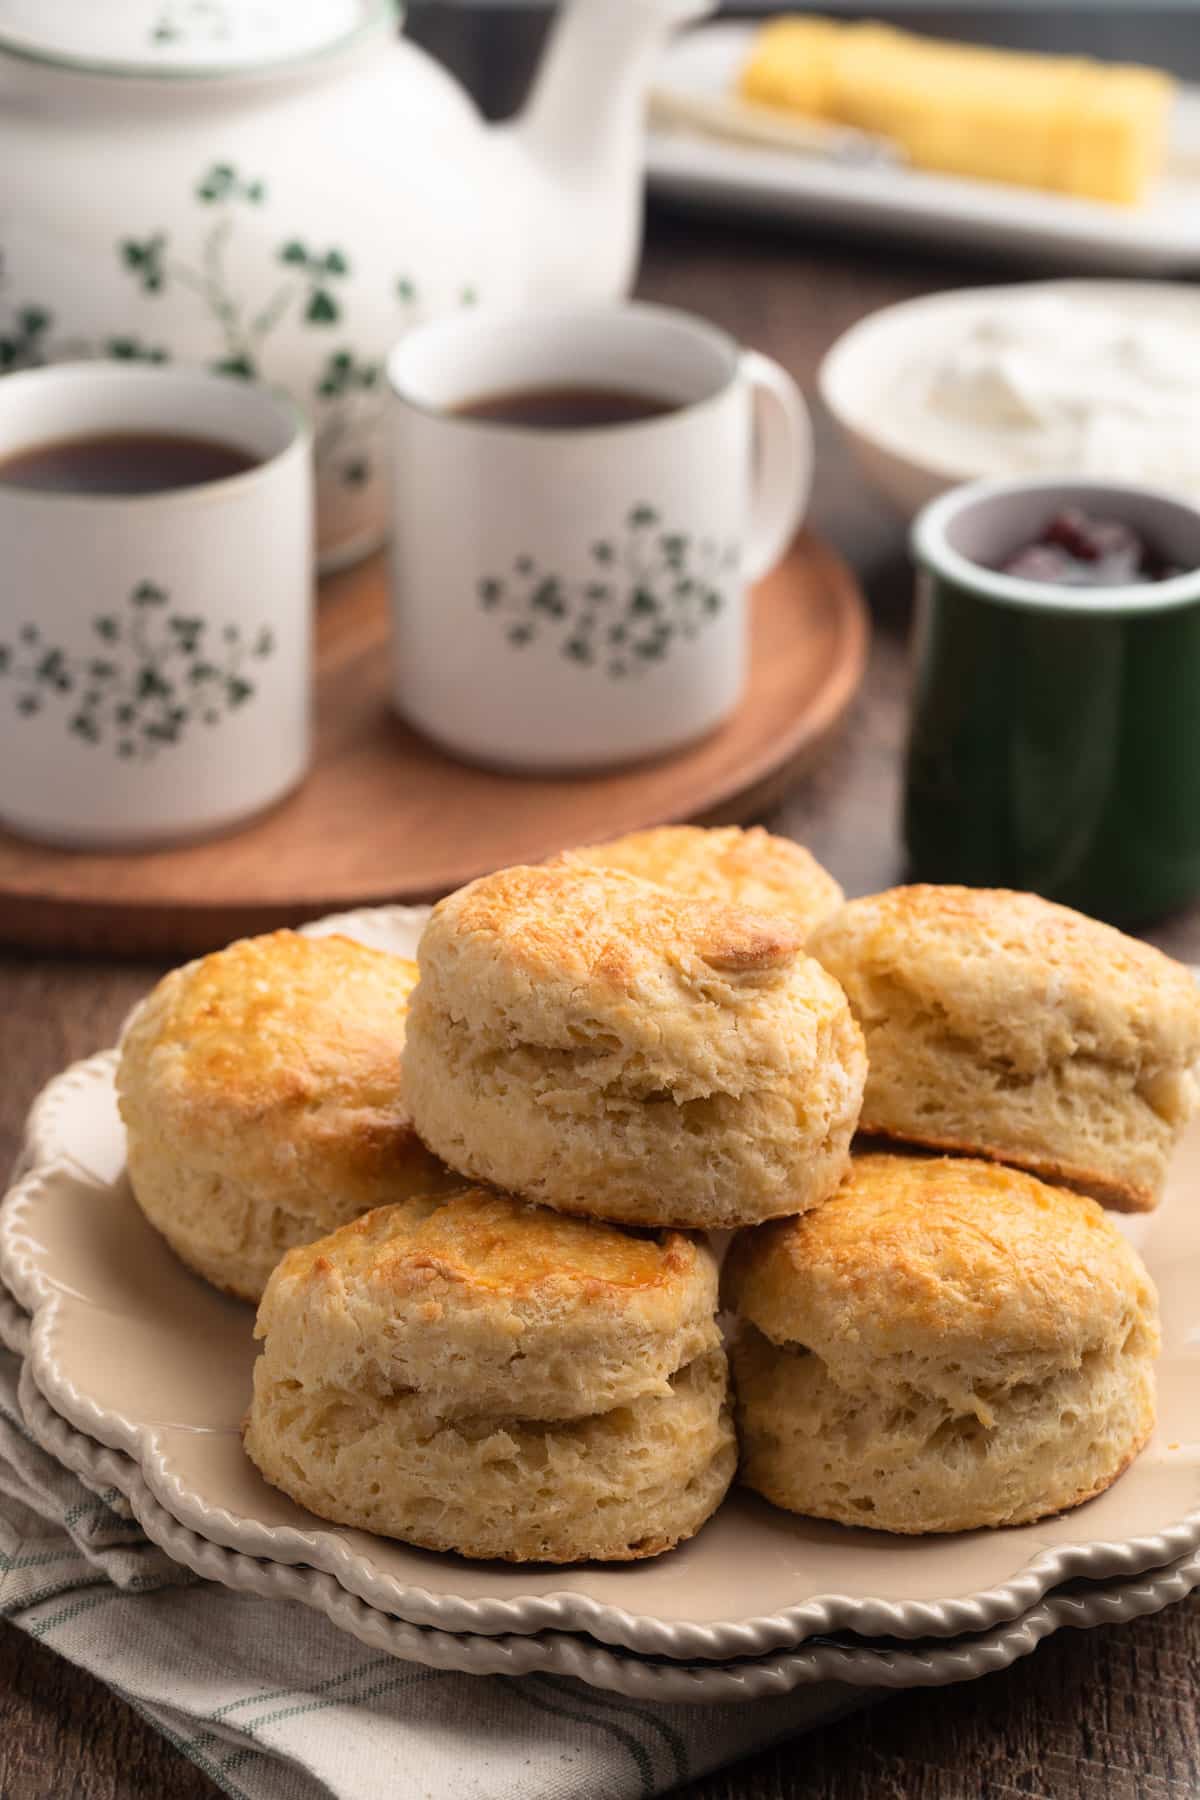 Irish Scones on an ivory plate, with a tea set in the background and bowls of whipped cream and jam